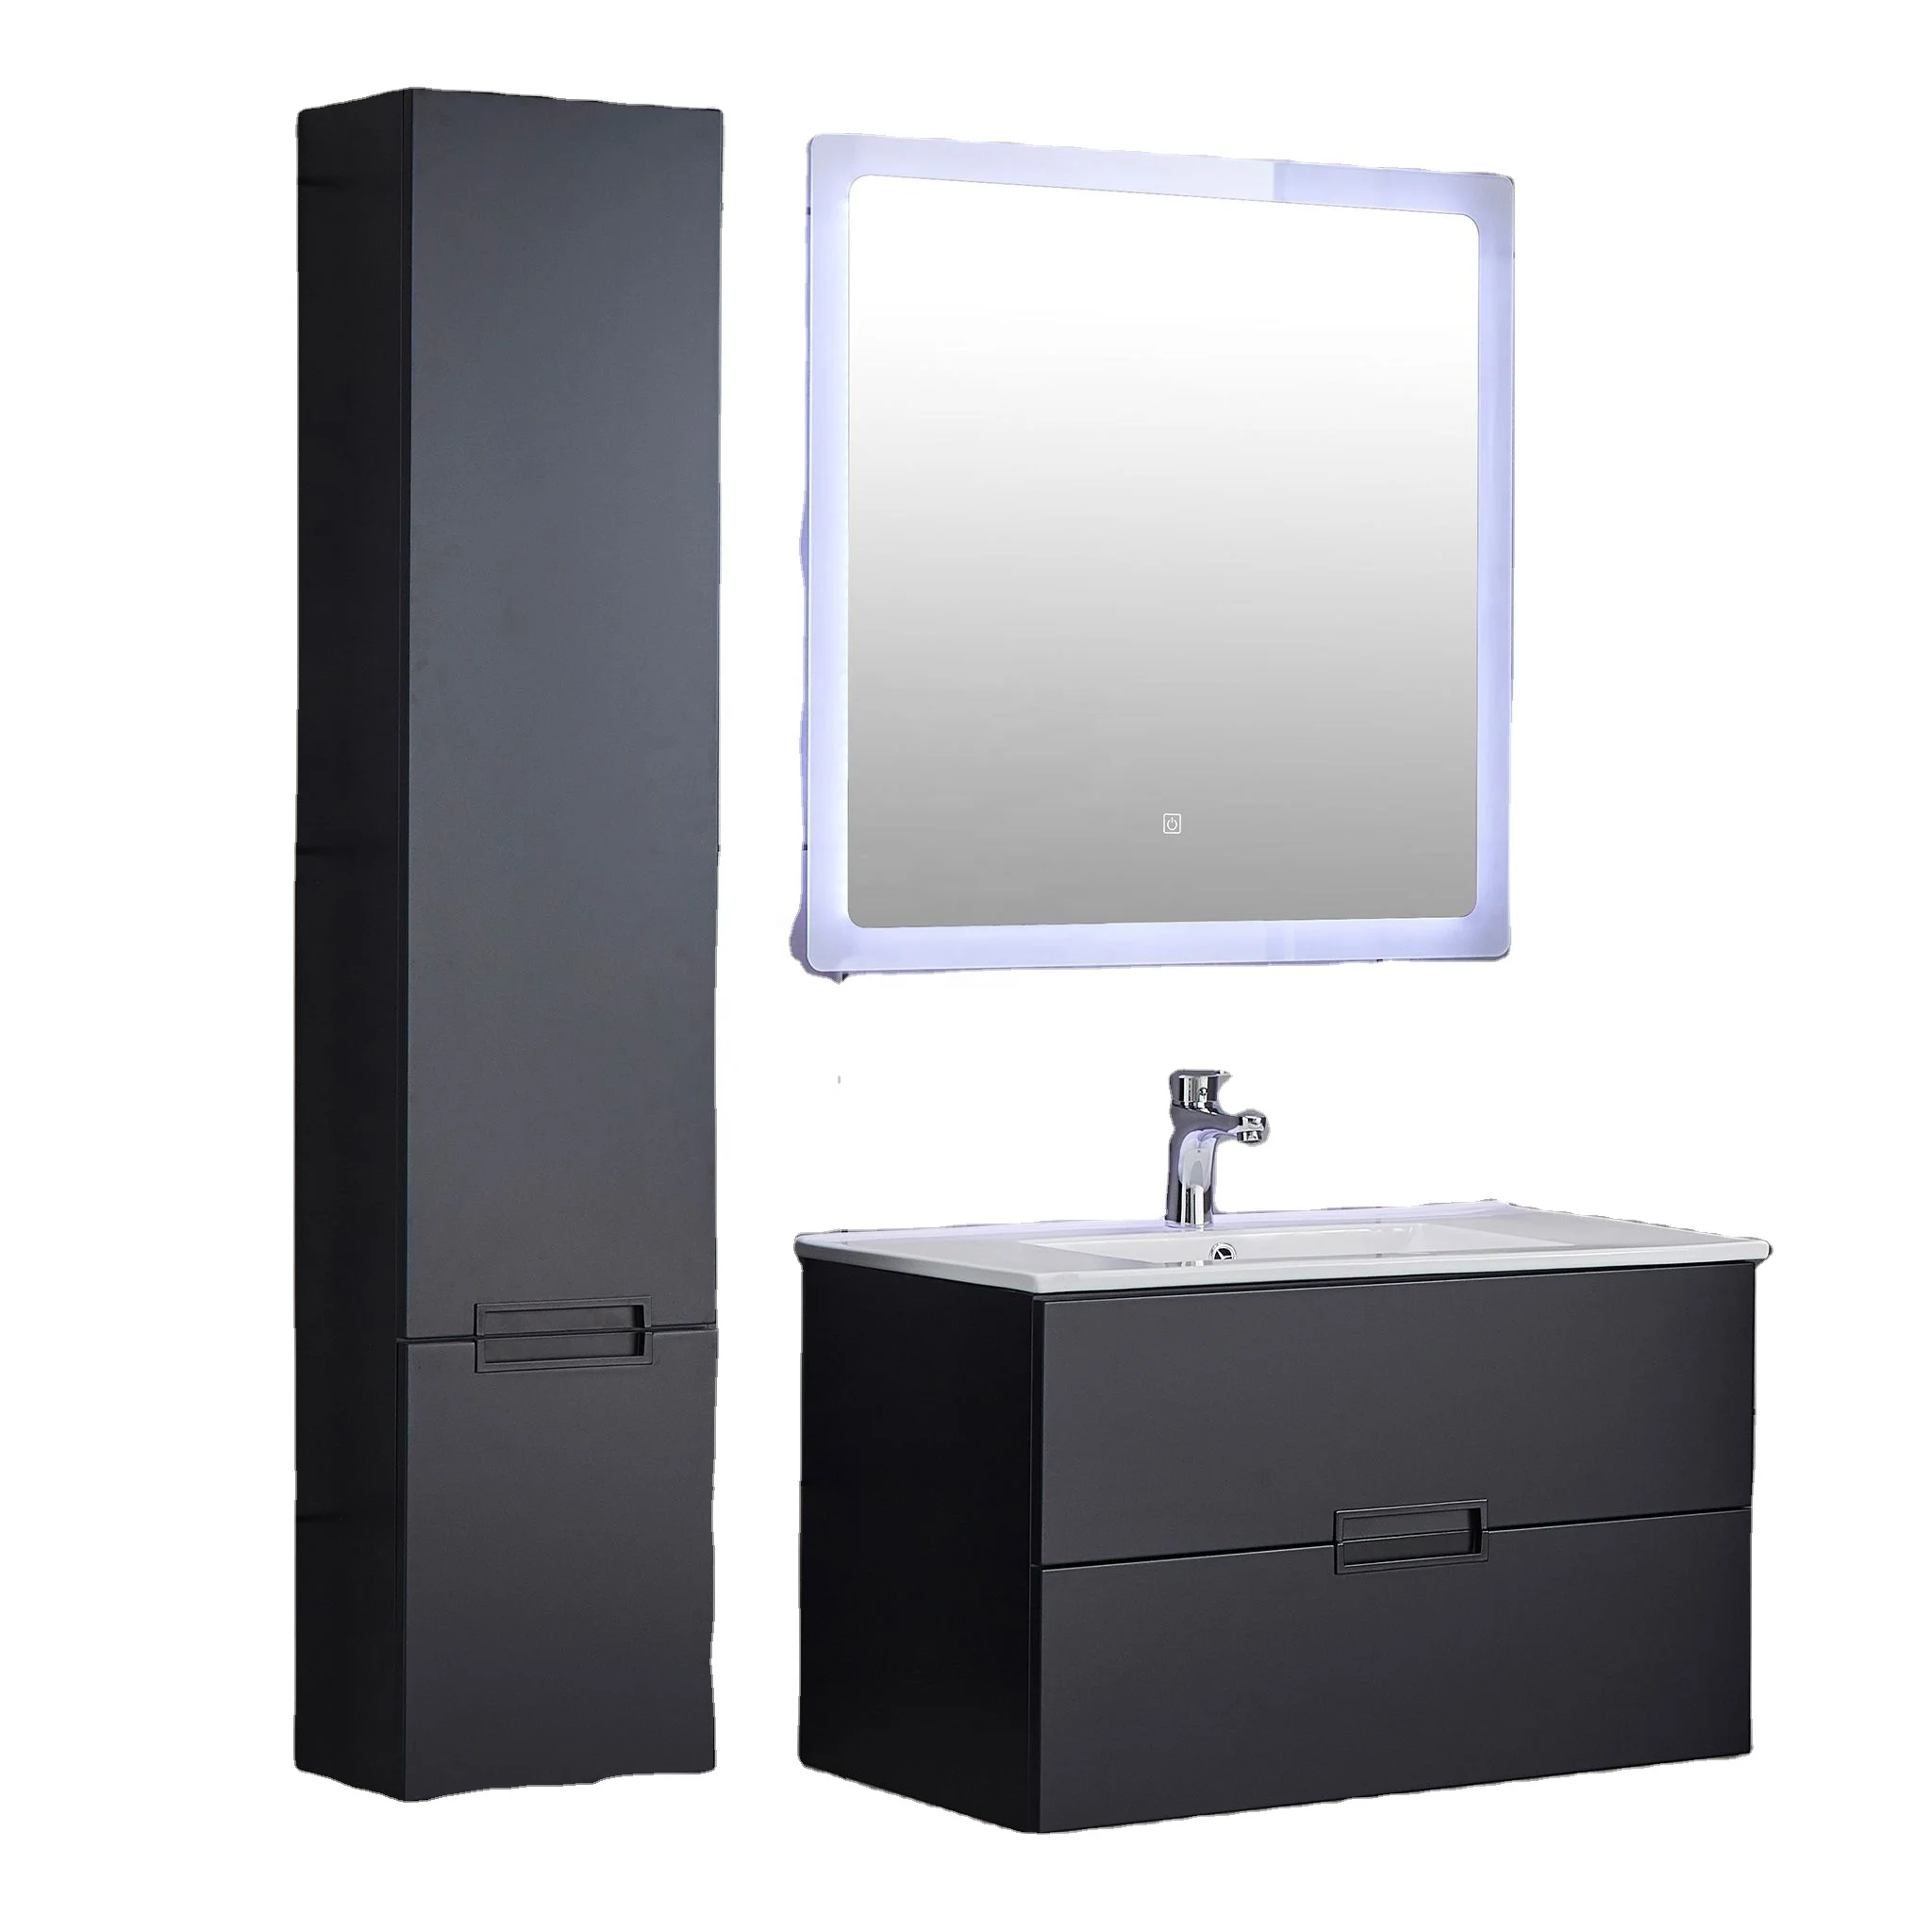 Led Mirror Mdf Bathroom Cabinets Furniture Lacquer Painting Hotel Washroom Vanity Black Color Buy Black Lacquer Bath Vanities